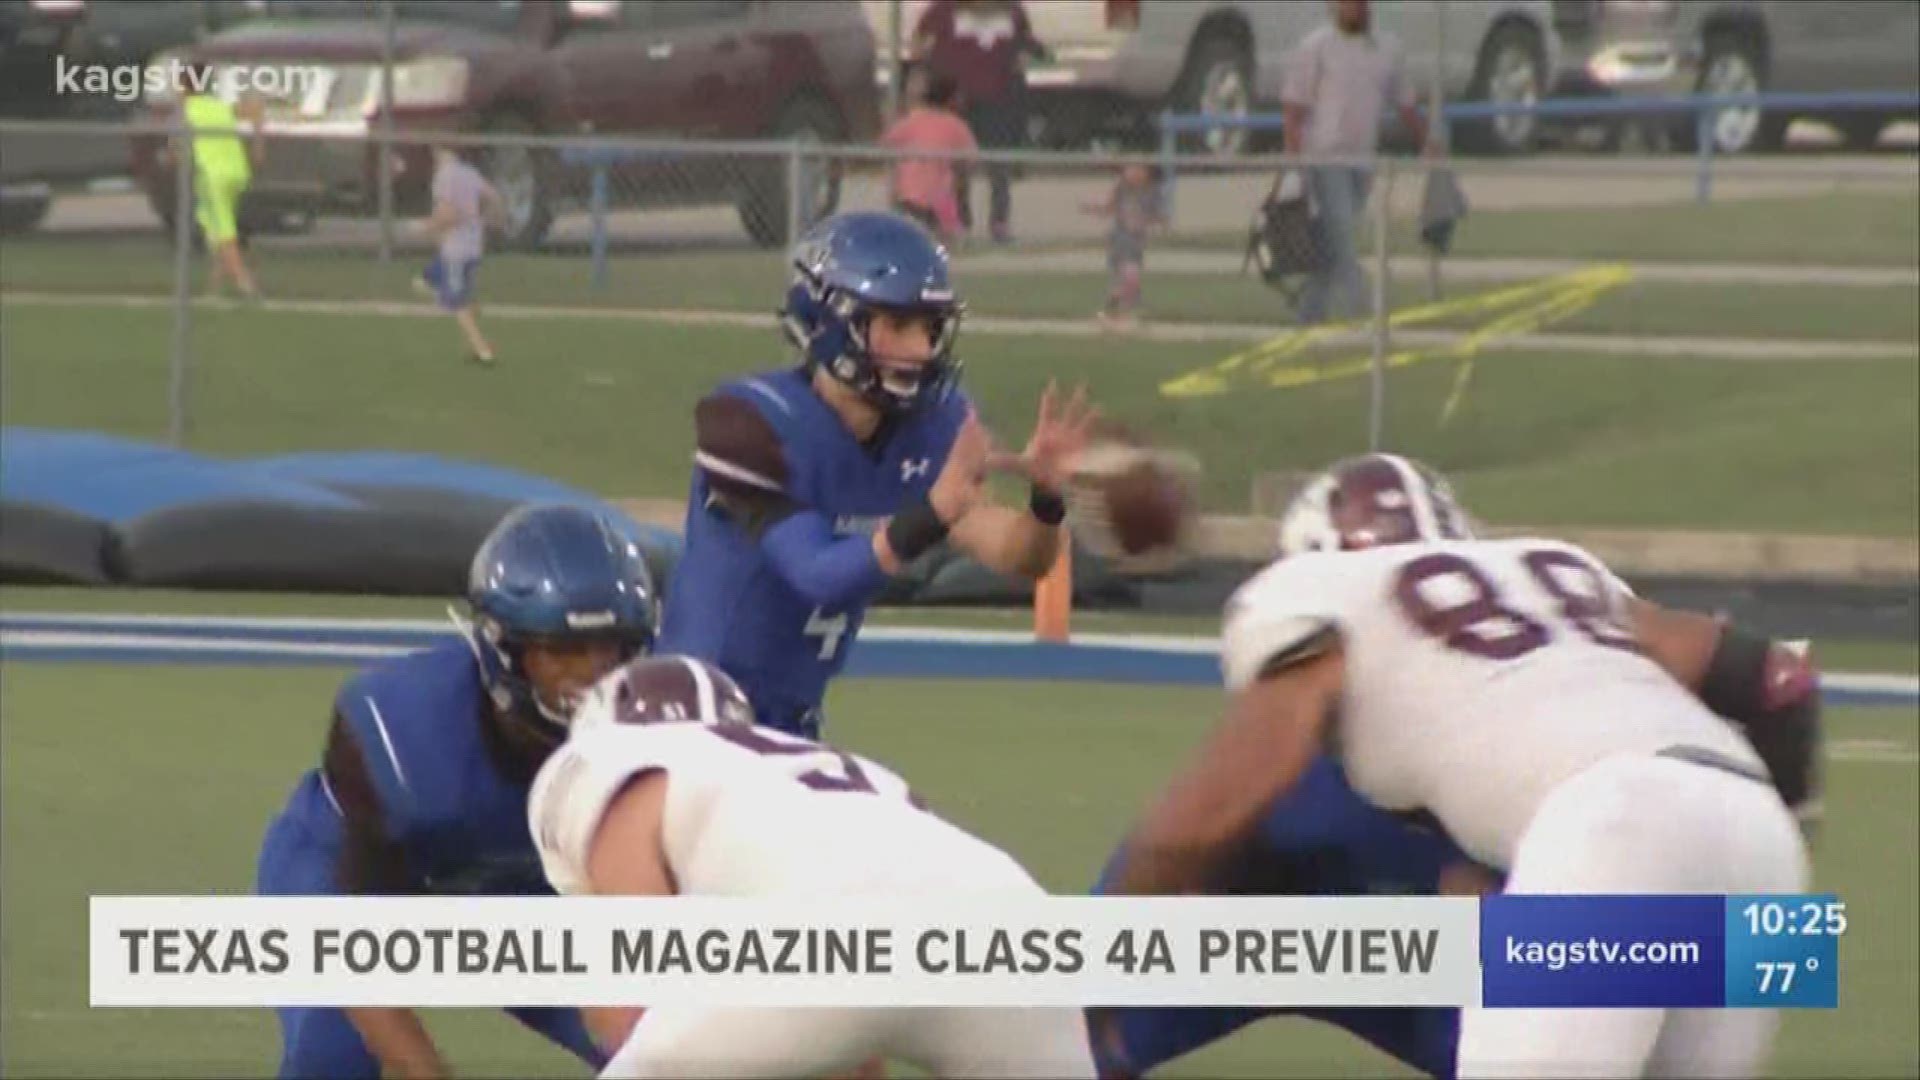 Here's a look at how Dave Campbell's Texas Football Magazine sees Class 4A playing out in the Brazos Valley.